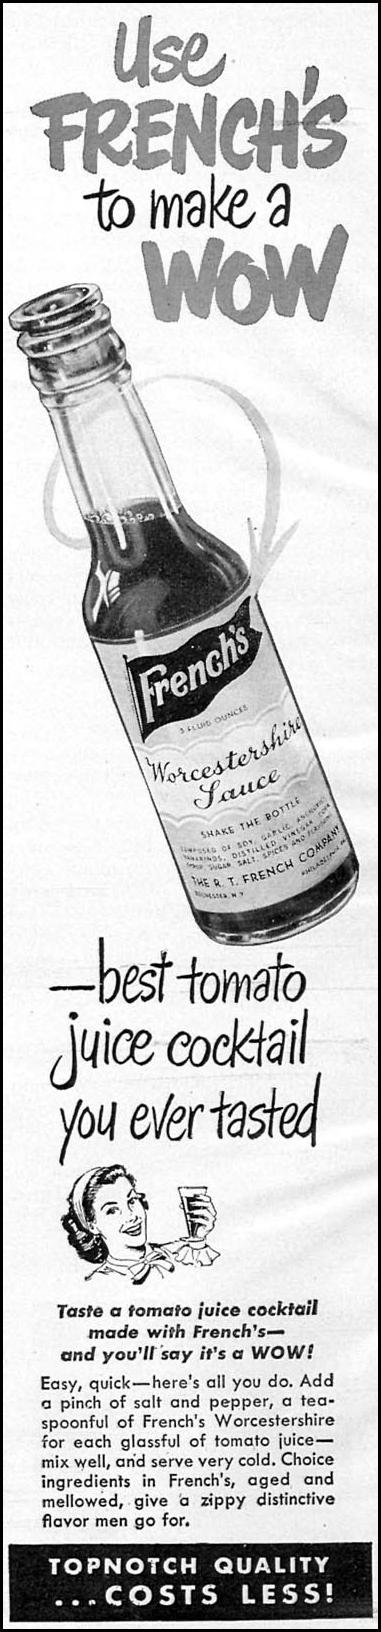 FRENCH'S WORCESTERSHIRE SAUCE
WOMAN'S DAY
09/01/1949
p. 24